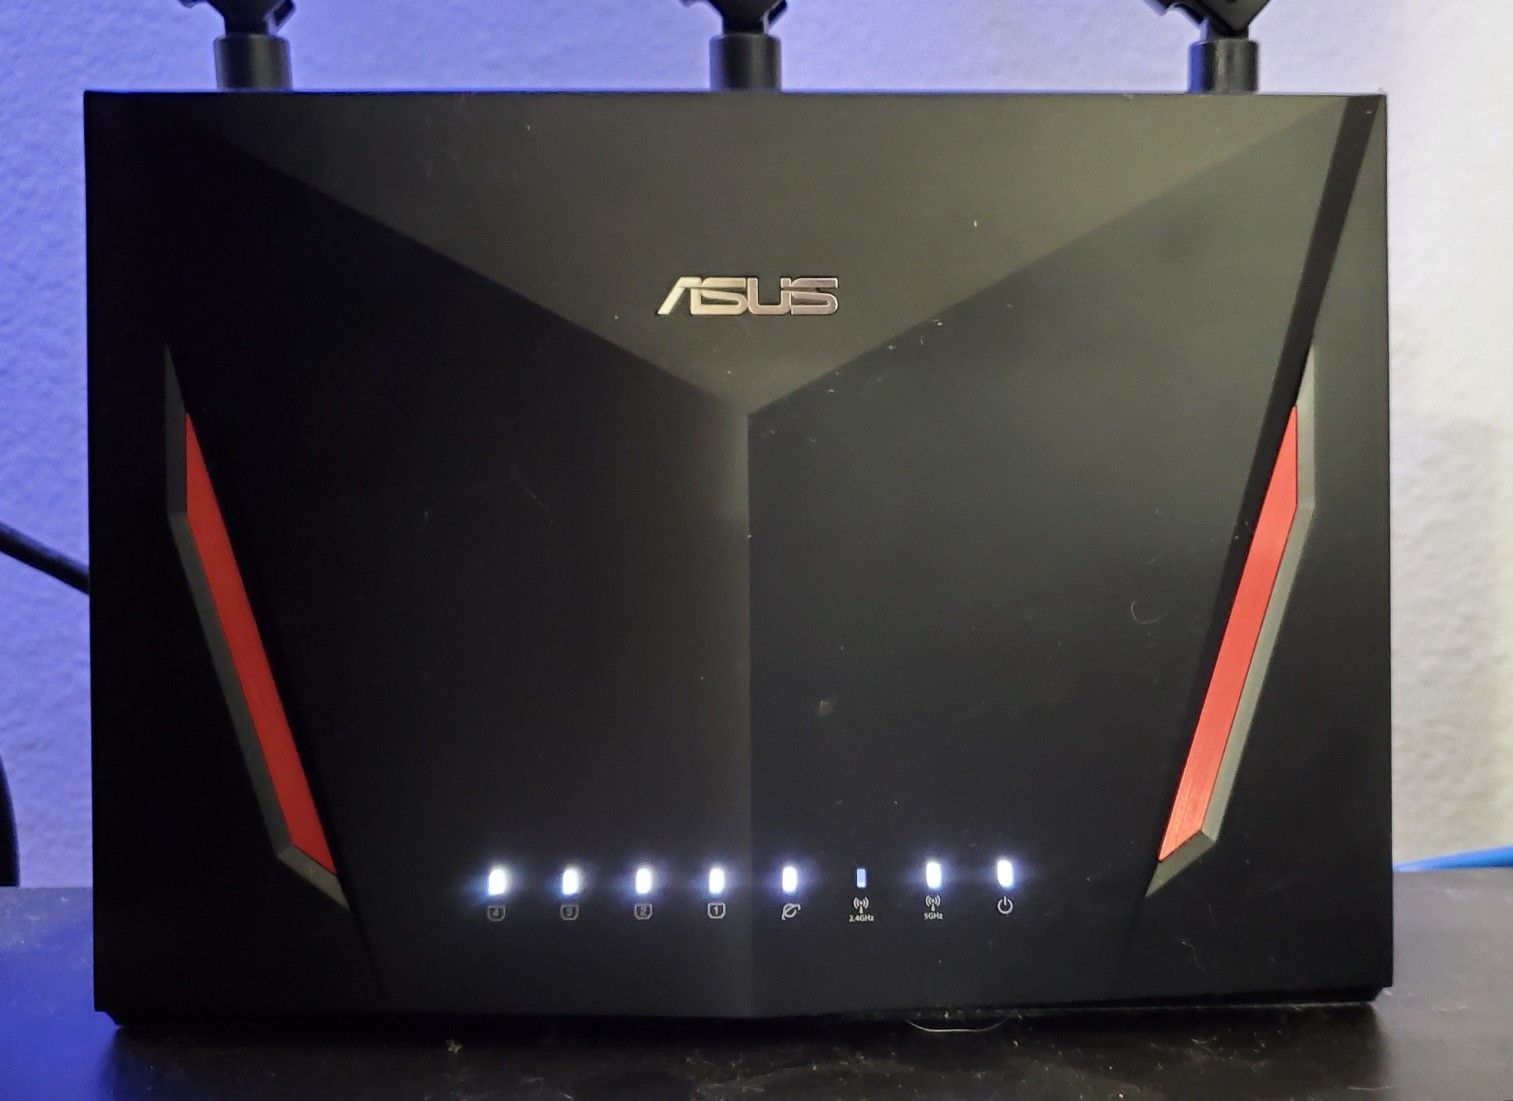 Asus RT-AC86U Router